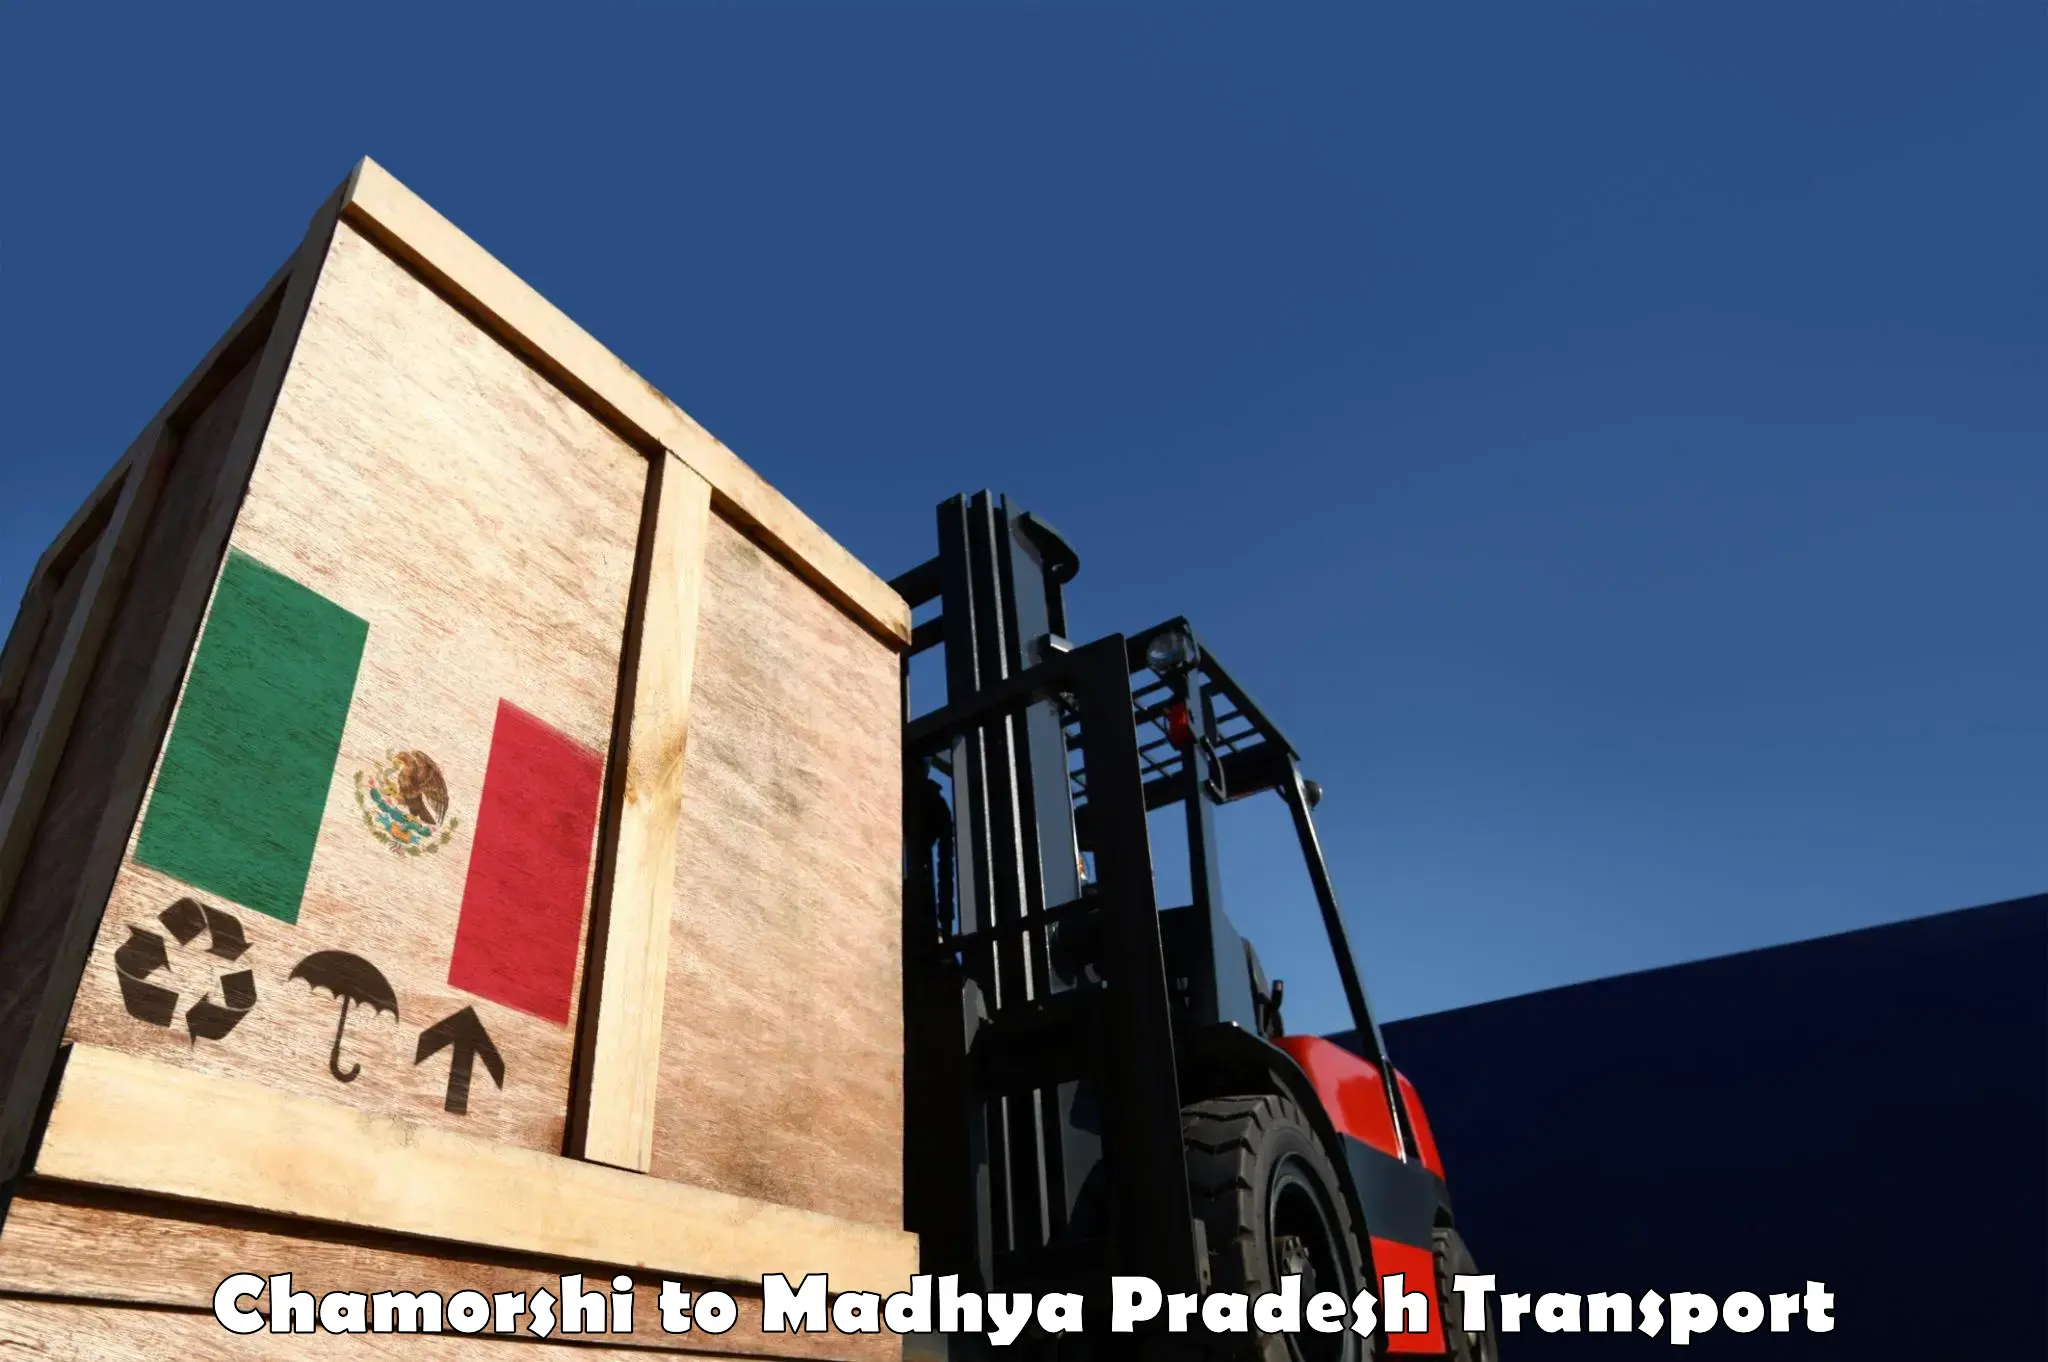 Part load transport service in India Chamorshi to Chanderi